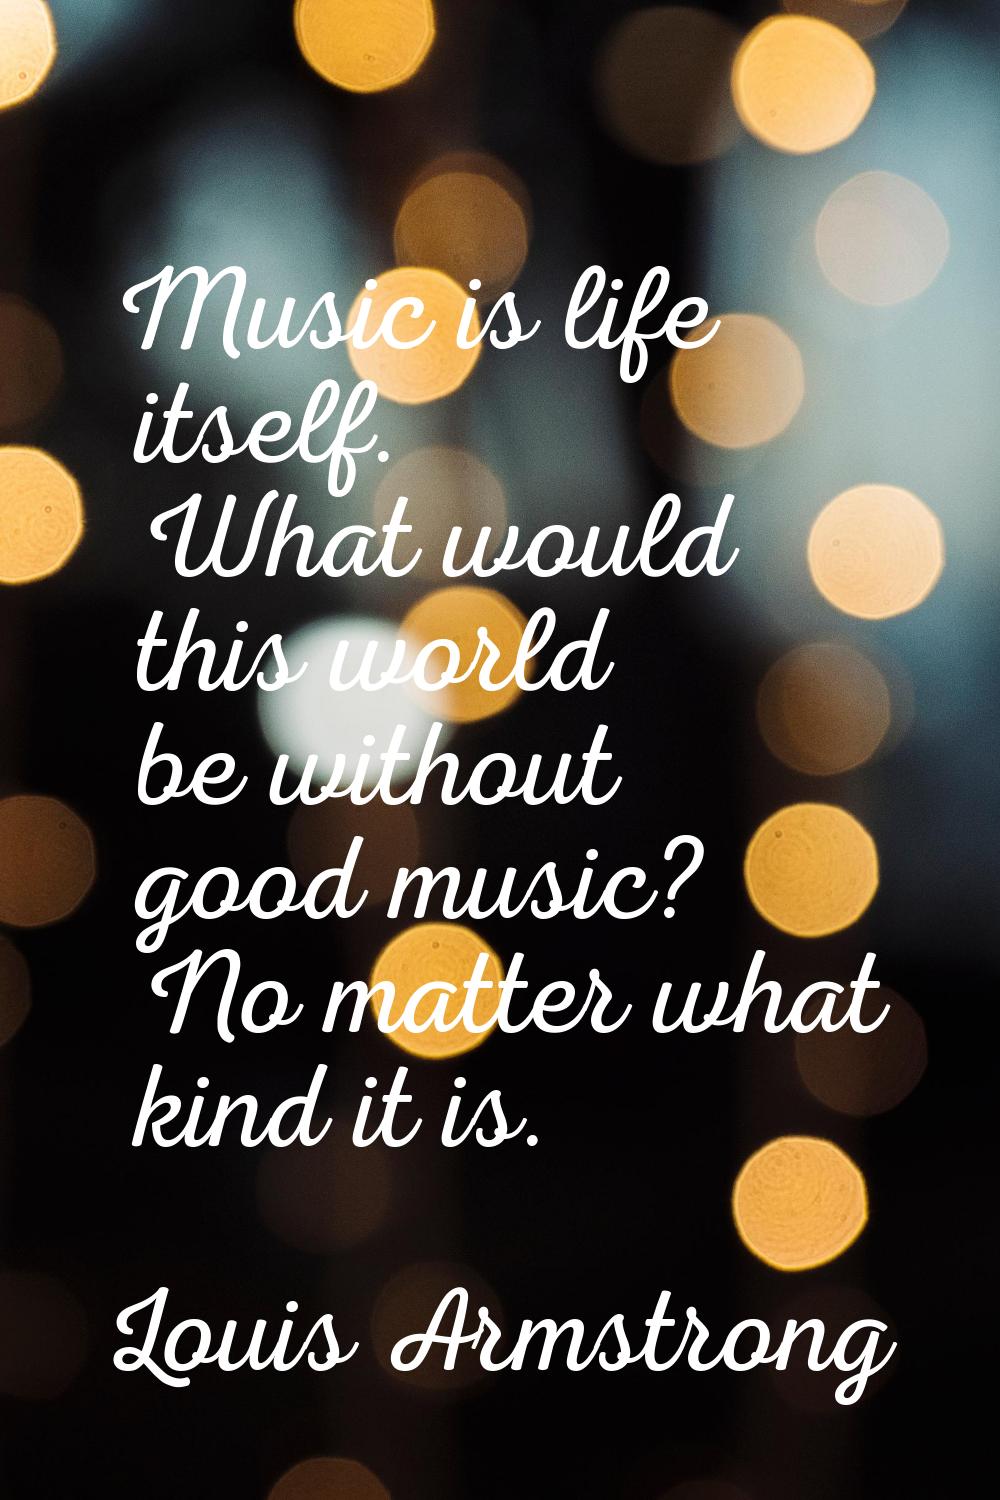 Music is life itself. What would this world be without good music? No matter what kind it is.